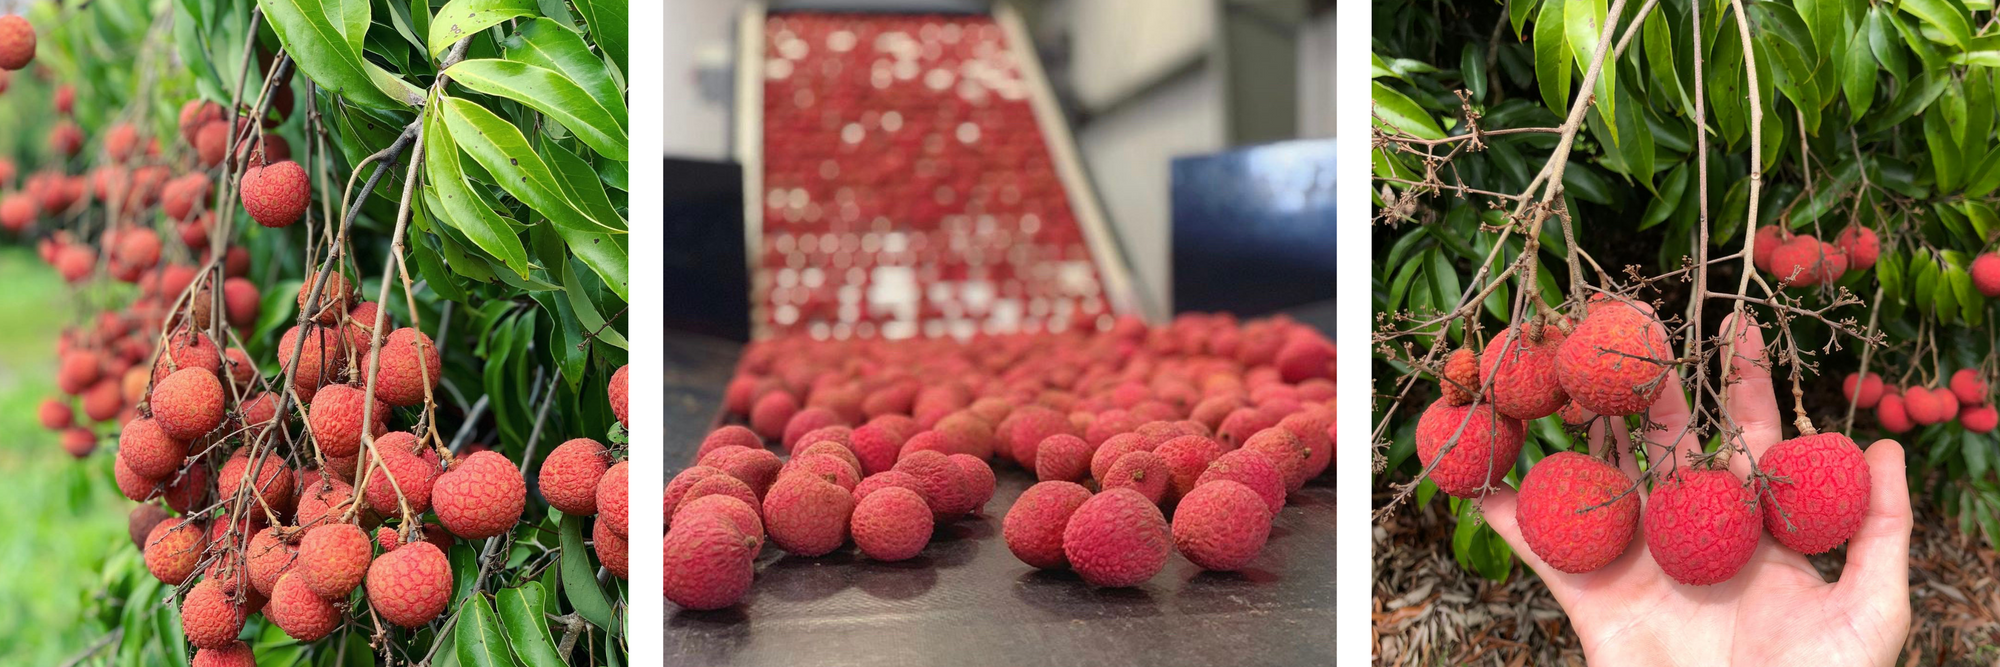 Three images of lychee fruit. Kaimana lychee from Hawaii on the tree, on the packing line and in hands to show the size of the fruit. Kaimana lychee from Hawaii are large, almost golf ball size with small pits.